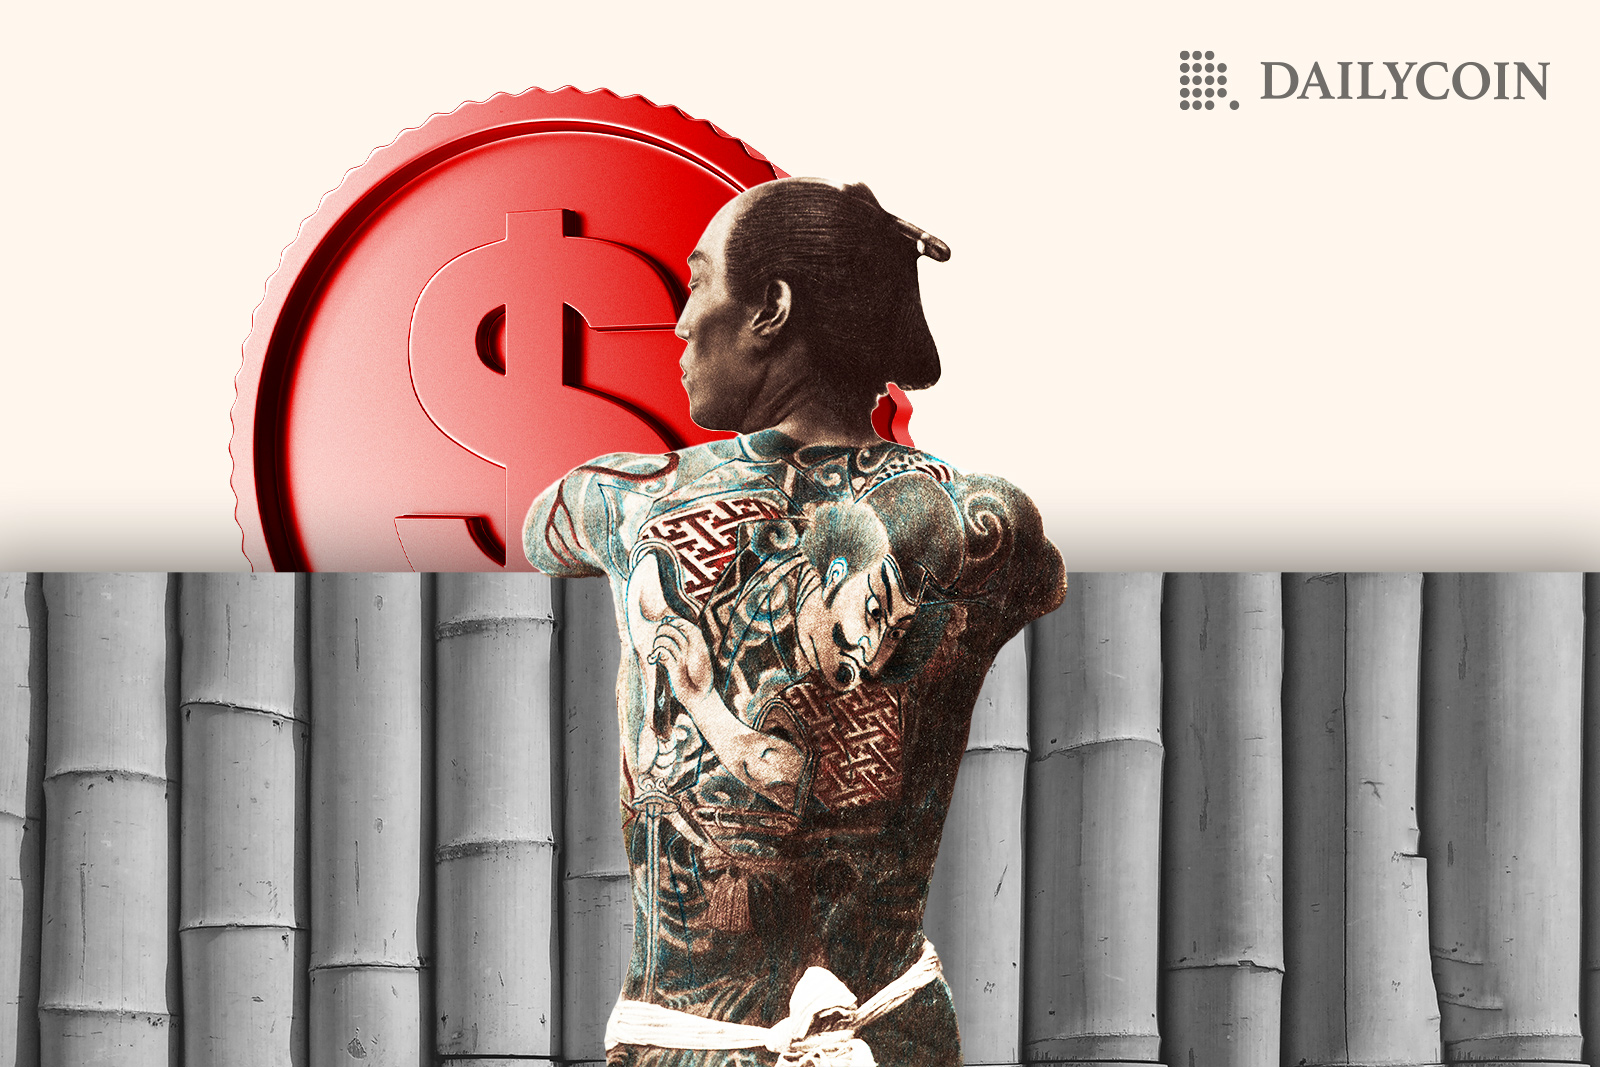 A man with a tattoo sleeve leaning on a metal fence in front of a Japan coin.